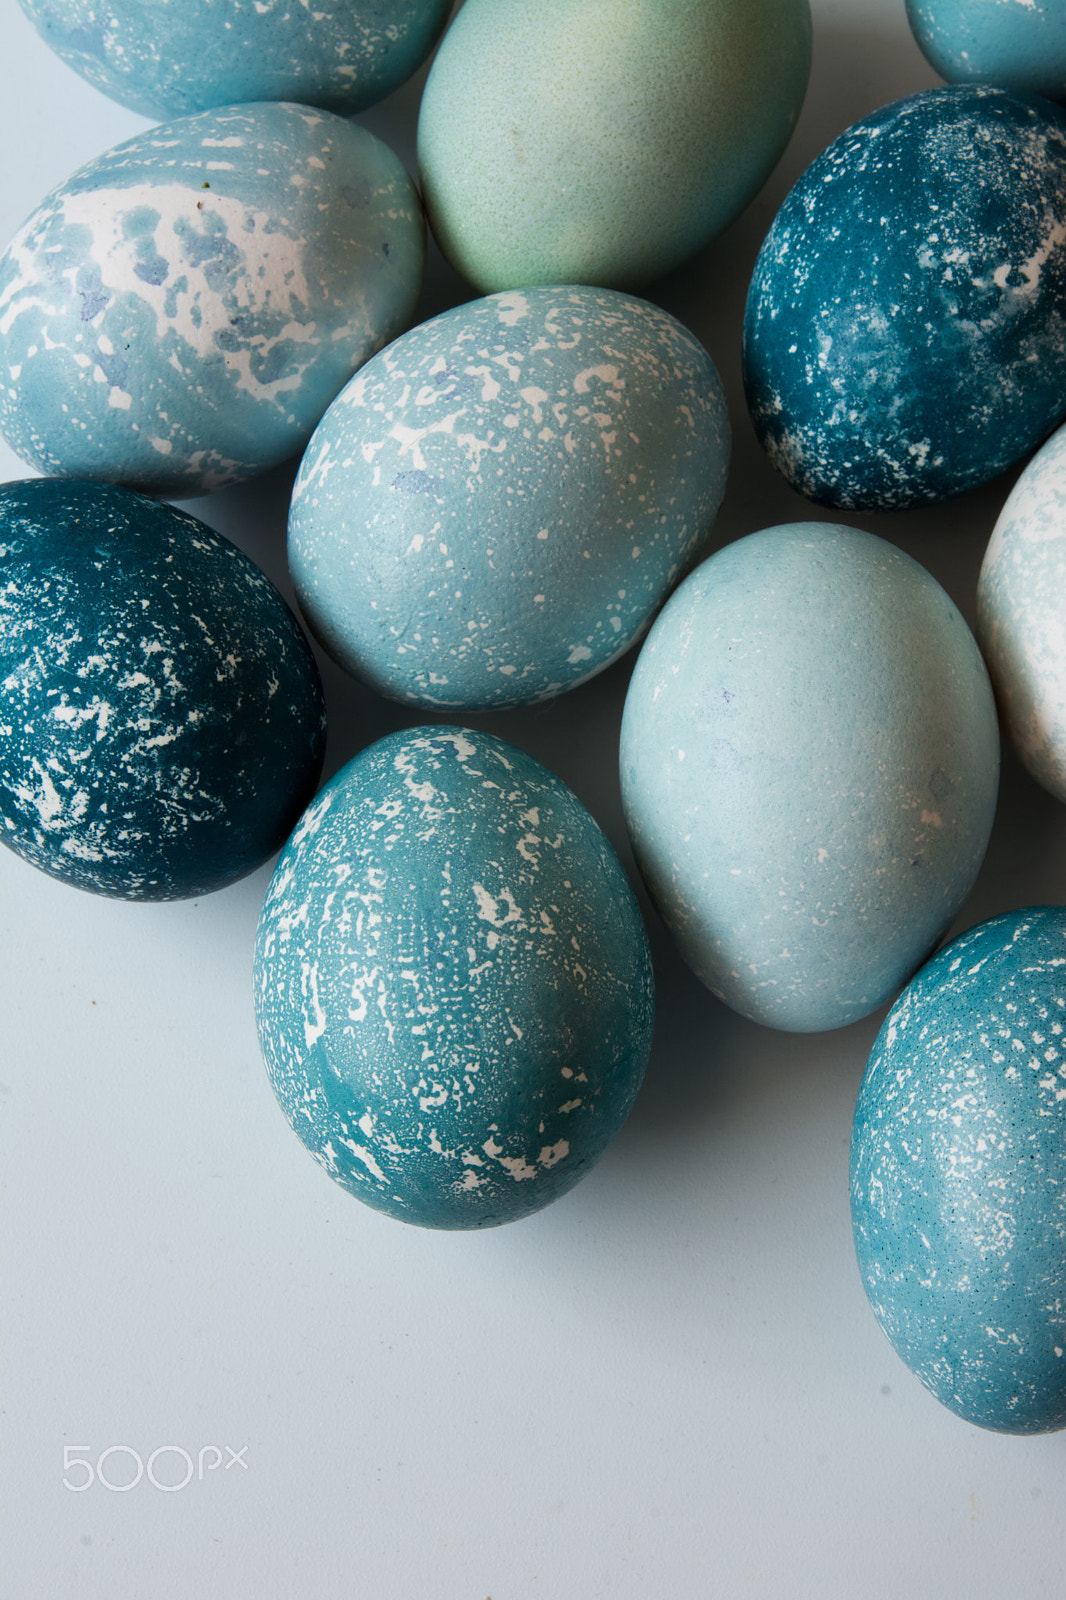 Nikon D7100 + Tamron SP AF 17-50mm F2.8 XR Di II VC LD Aspherical (IF) sample photo. Easter eggs, dyed blue dye photography